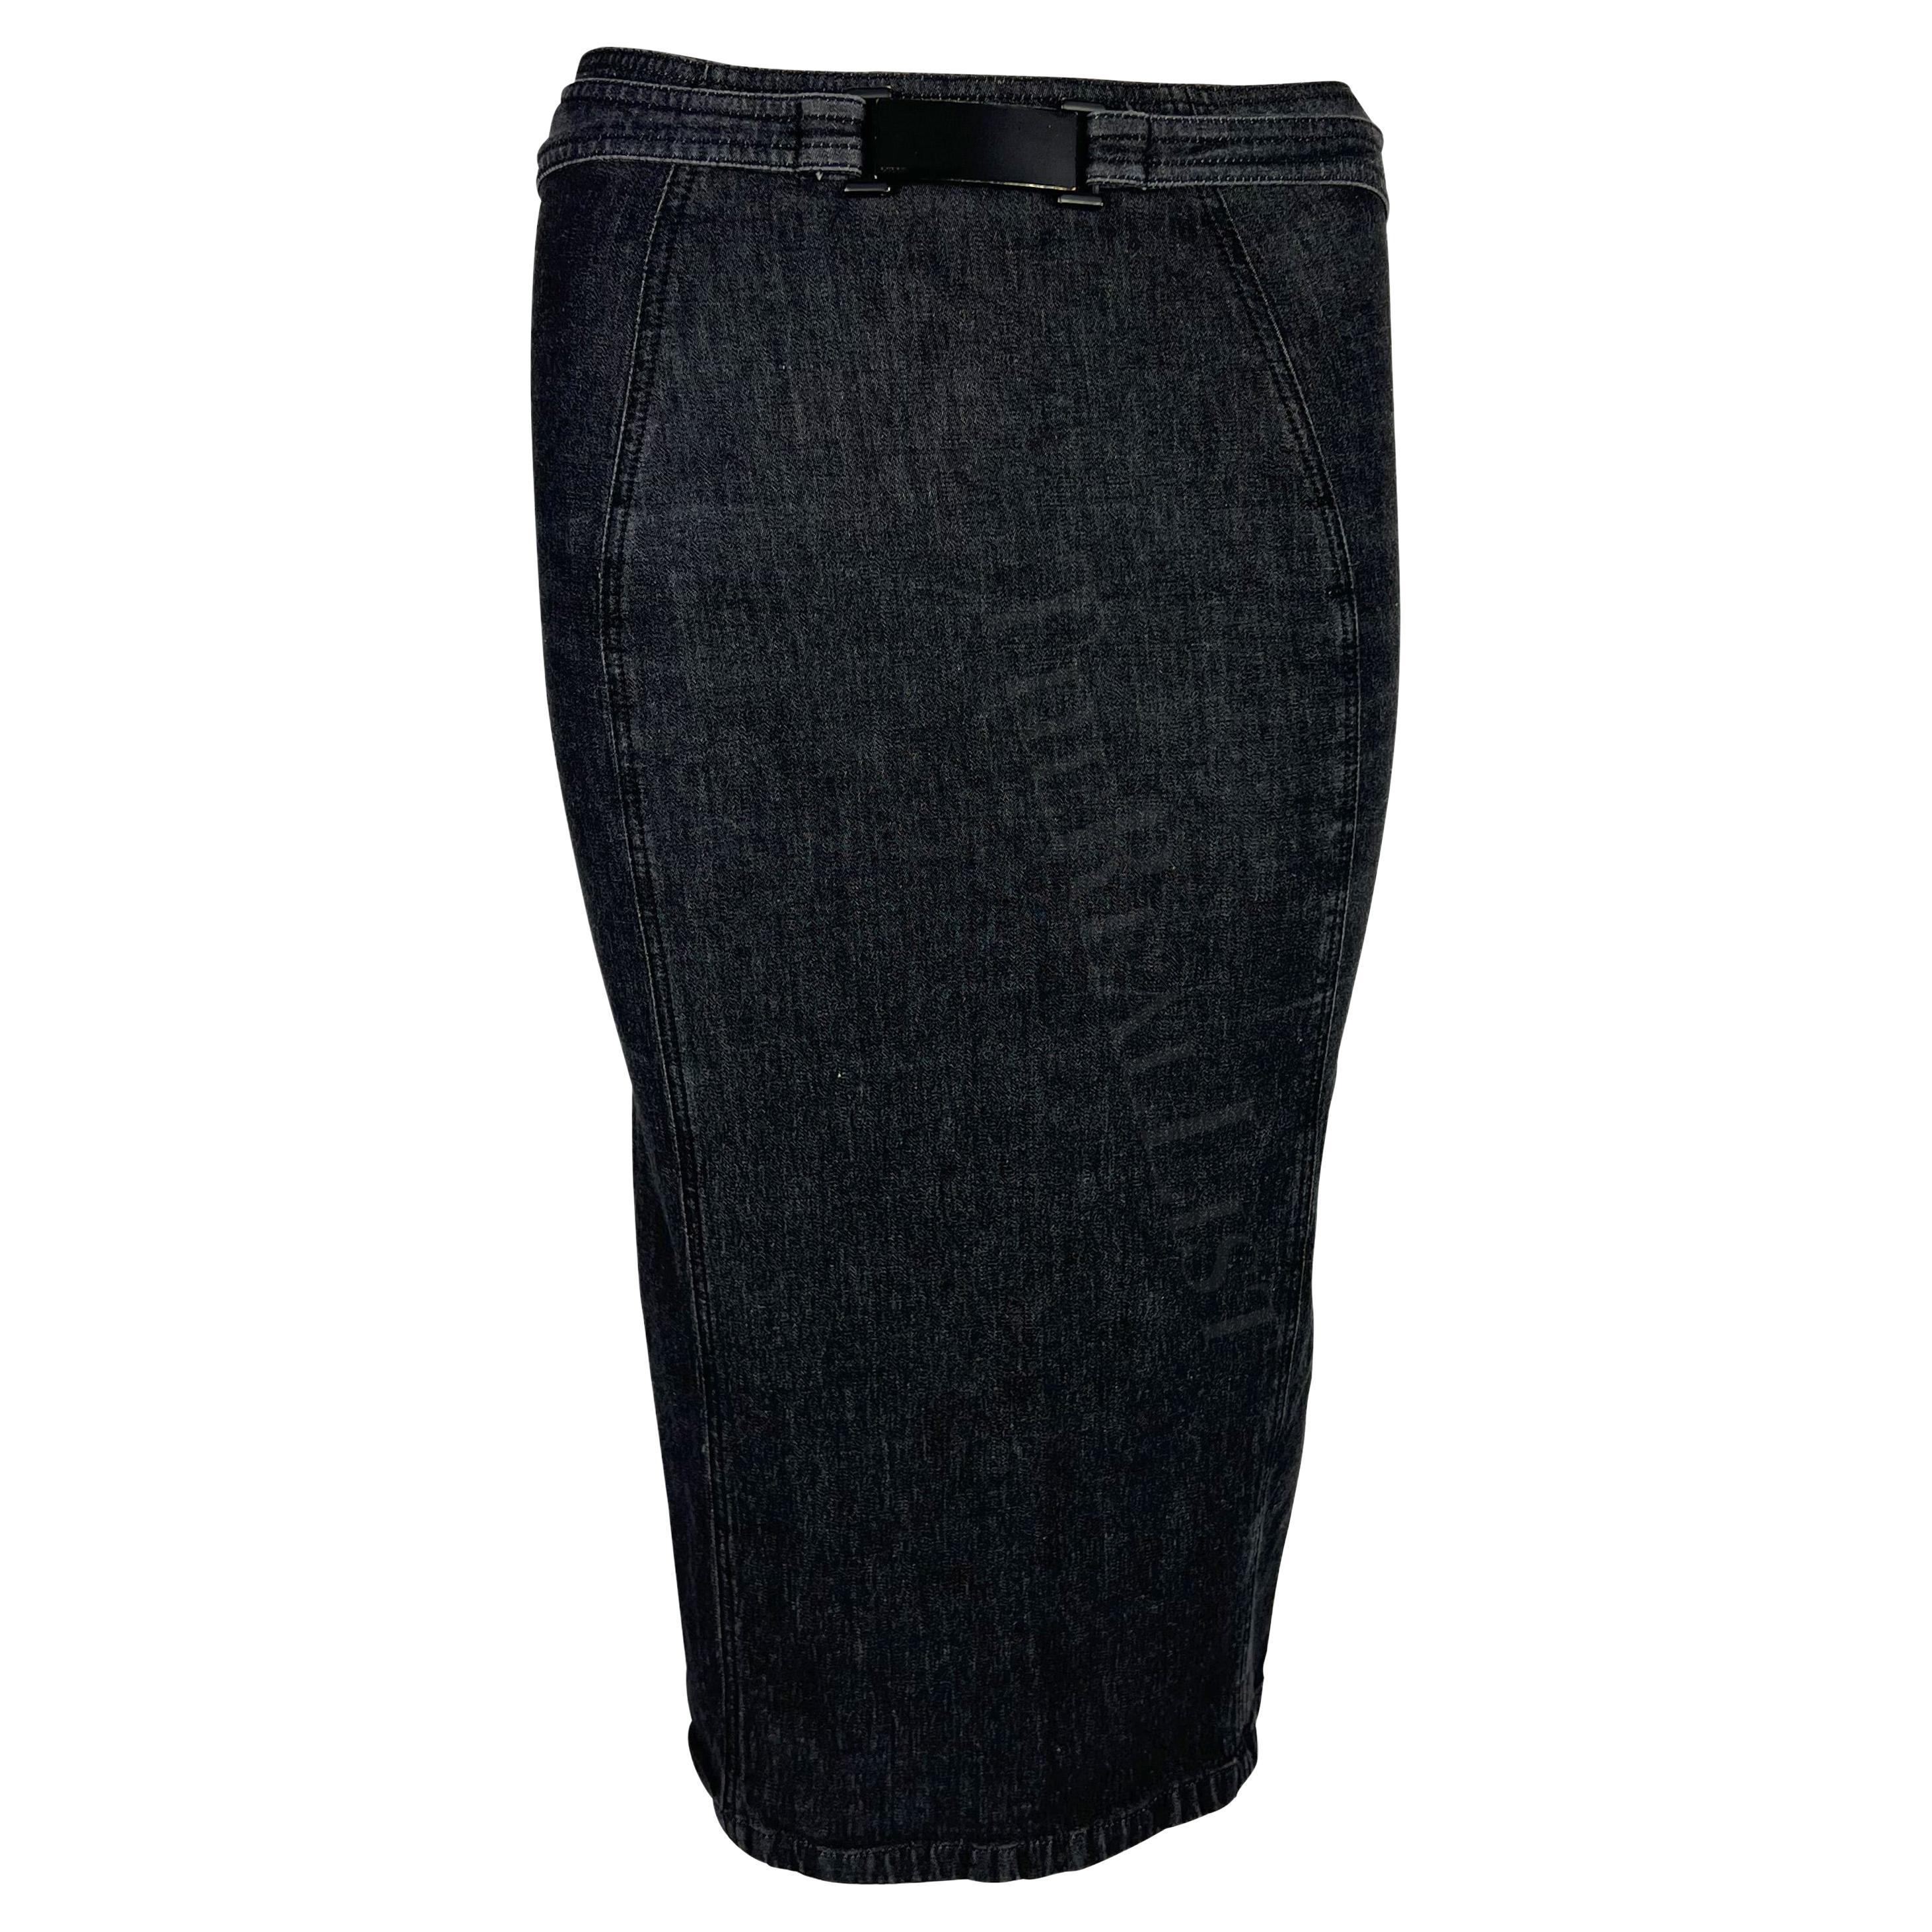 2001 Gucci by Tom Ford Dark Wash Denim Skirt with Metal Buckle For Sale